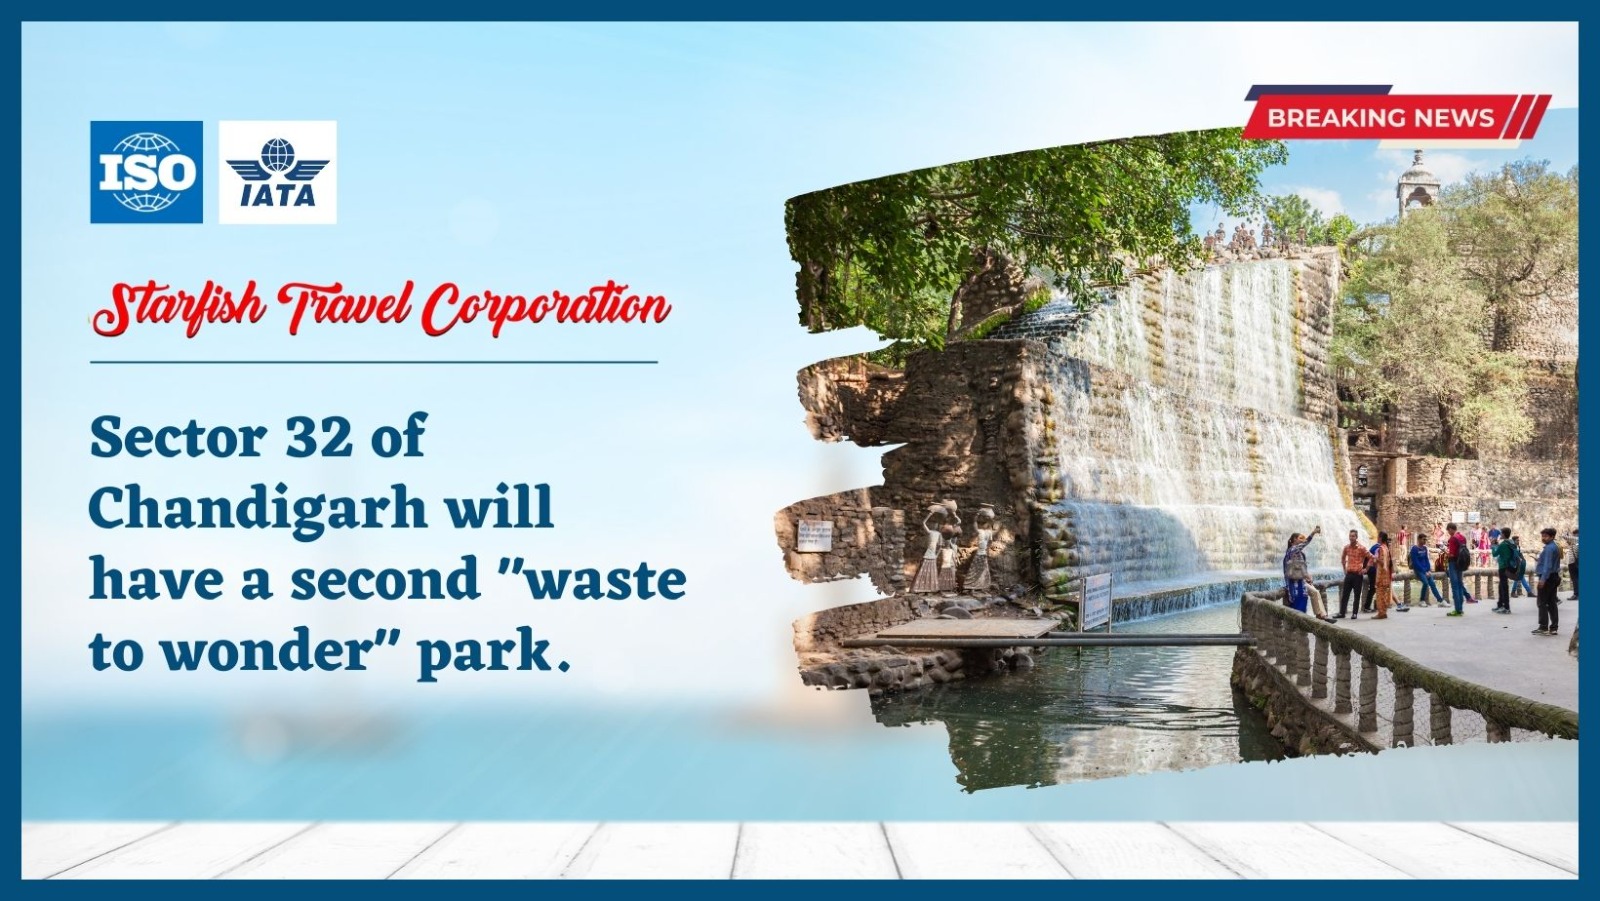 Sector 32 of Chandigarh will have a second “waste to wonder” park.